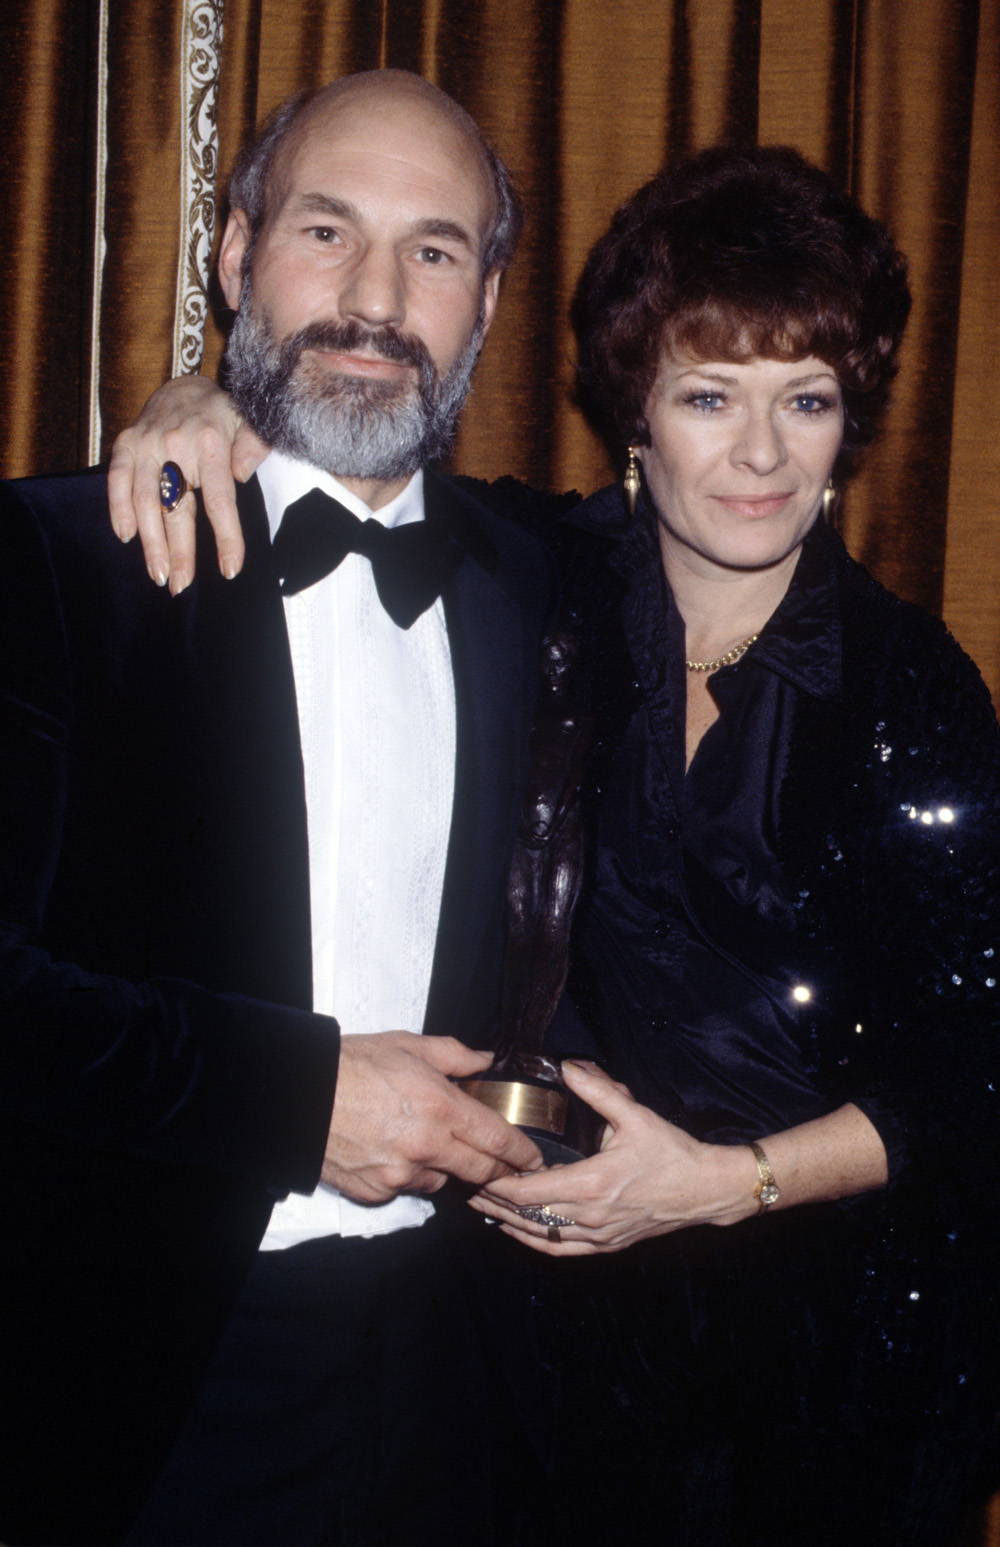 <p>Patrick Stewart and Janet Suzman appear at London’s West End Theatre Awards in 1979. They were castmates in the Royal Shakespeare Company.</p>